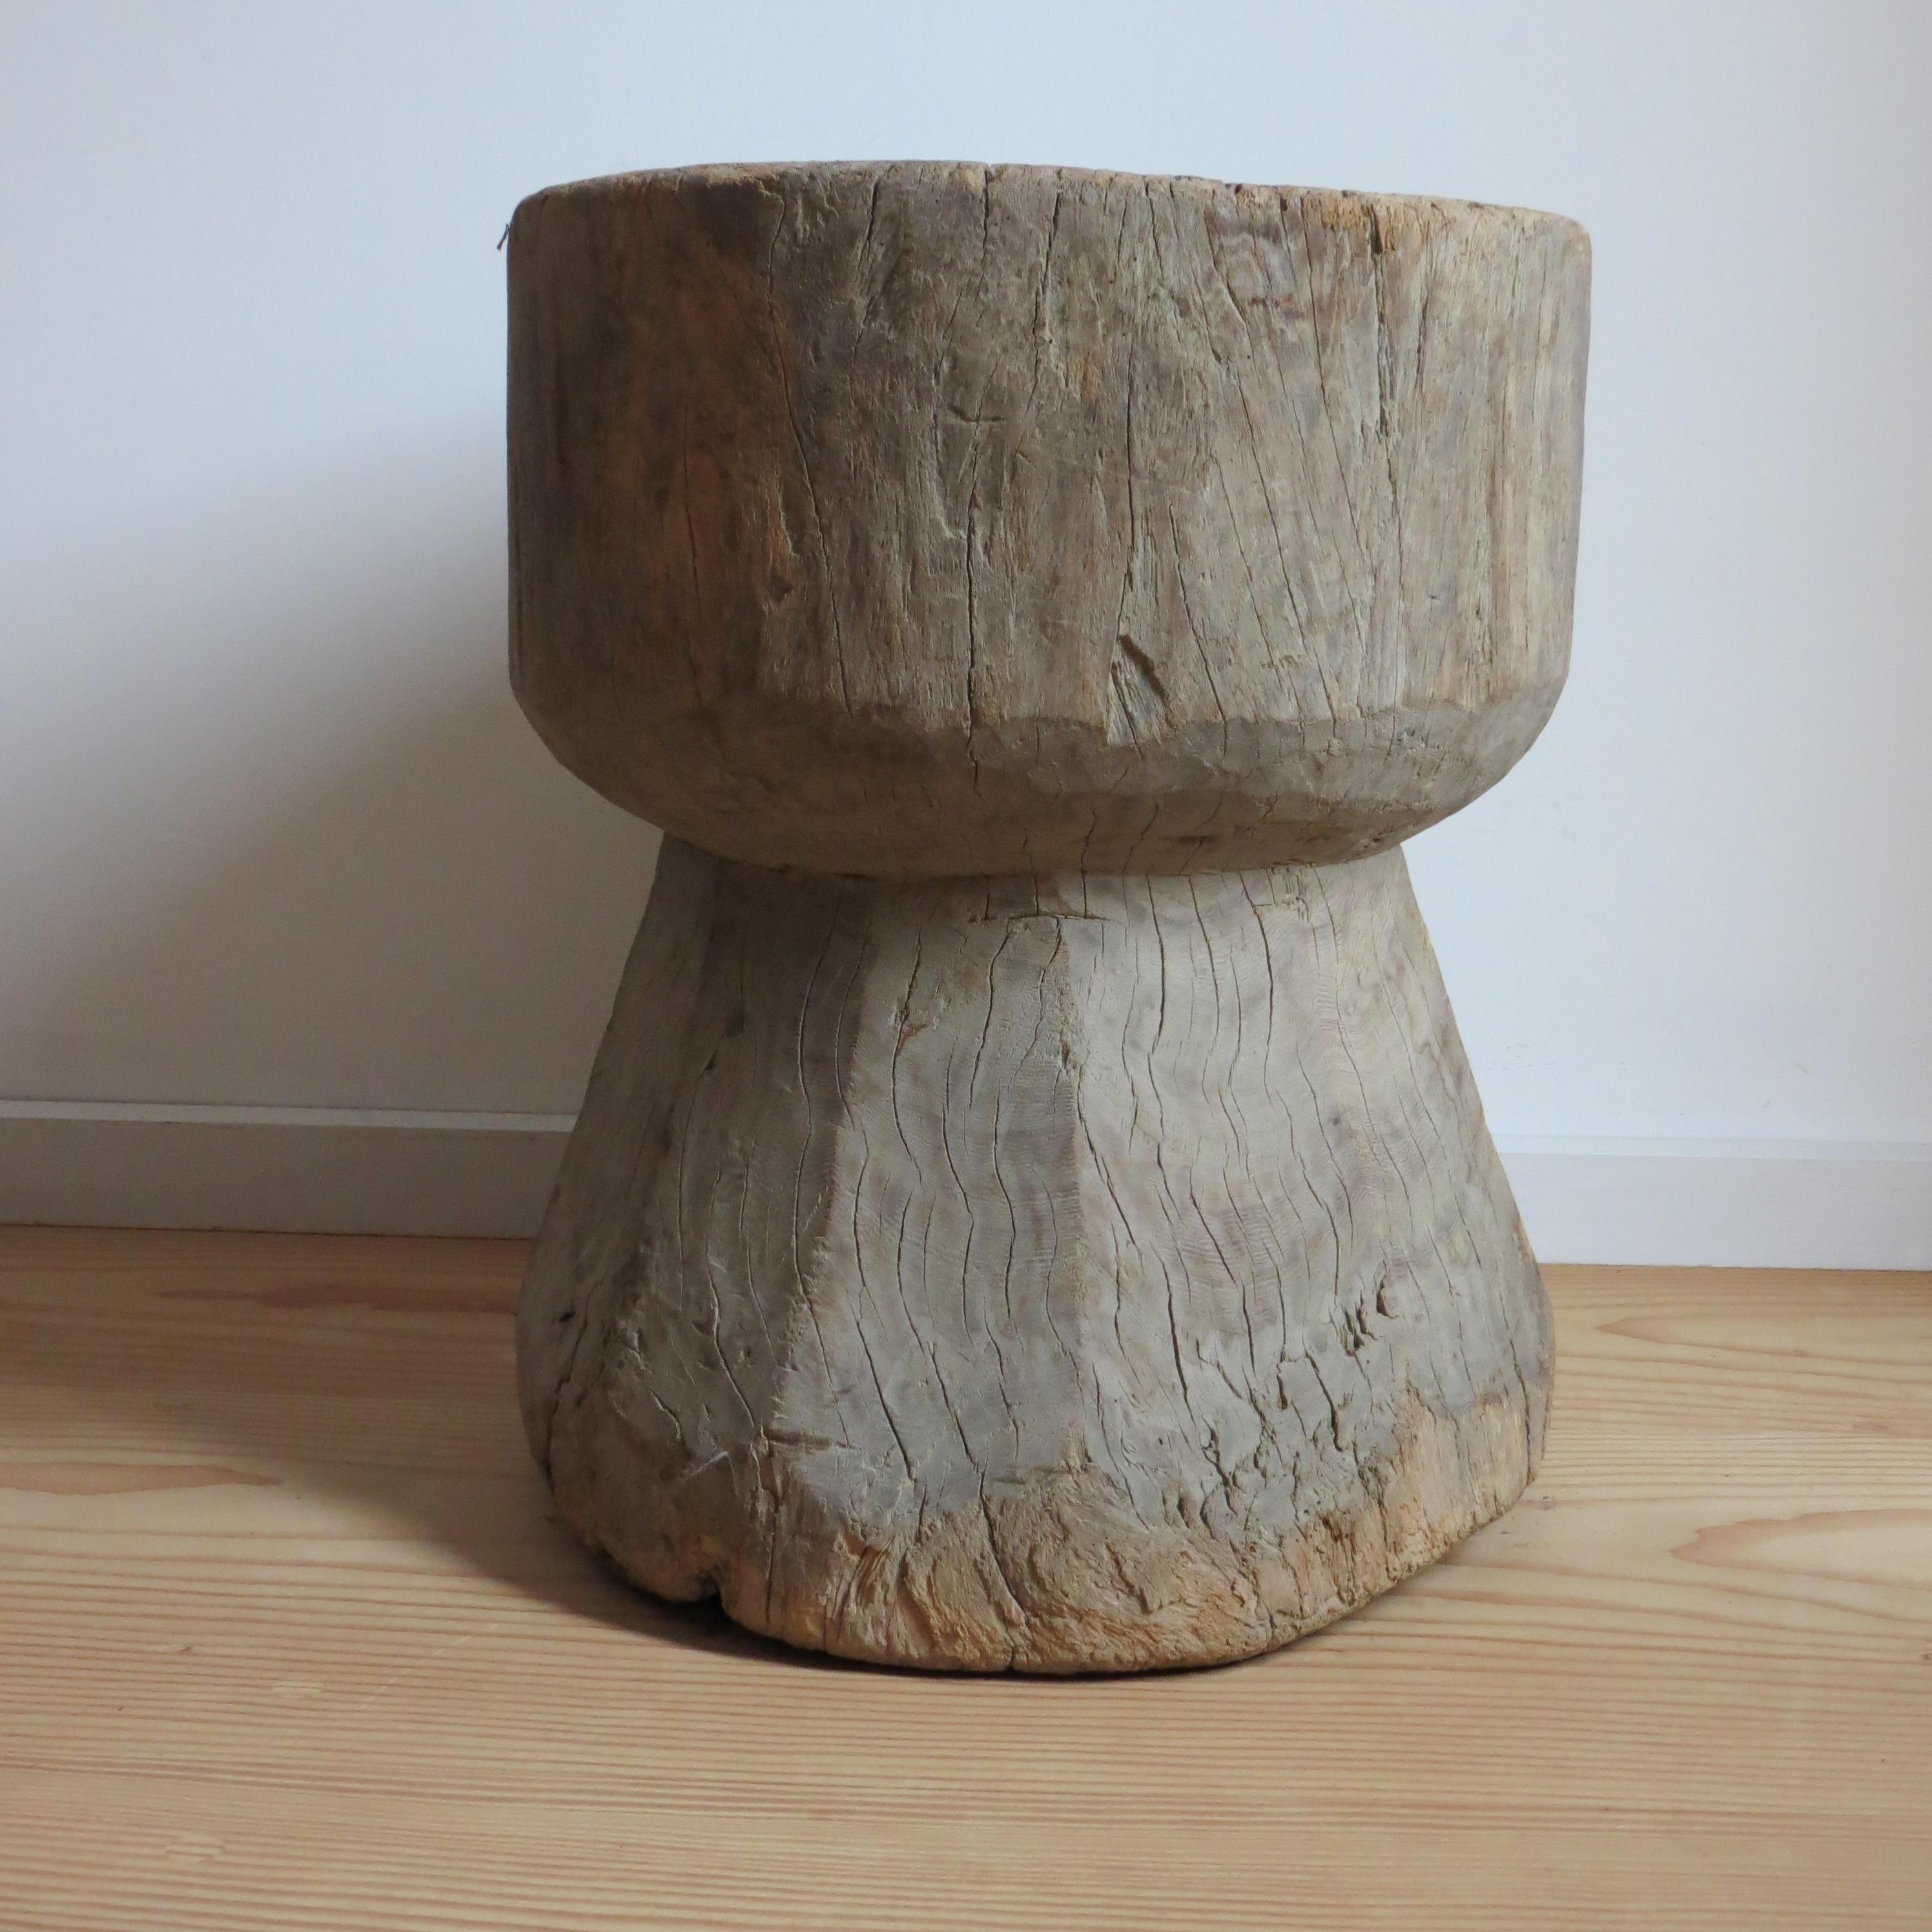 Antique Primitive Rustic Large Plant Holder Mortar African In Good Condition For Sale In Stow on the Wold, GB